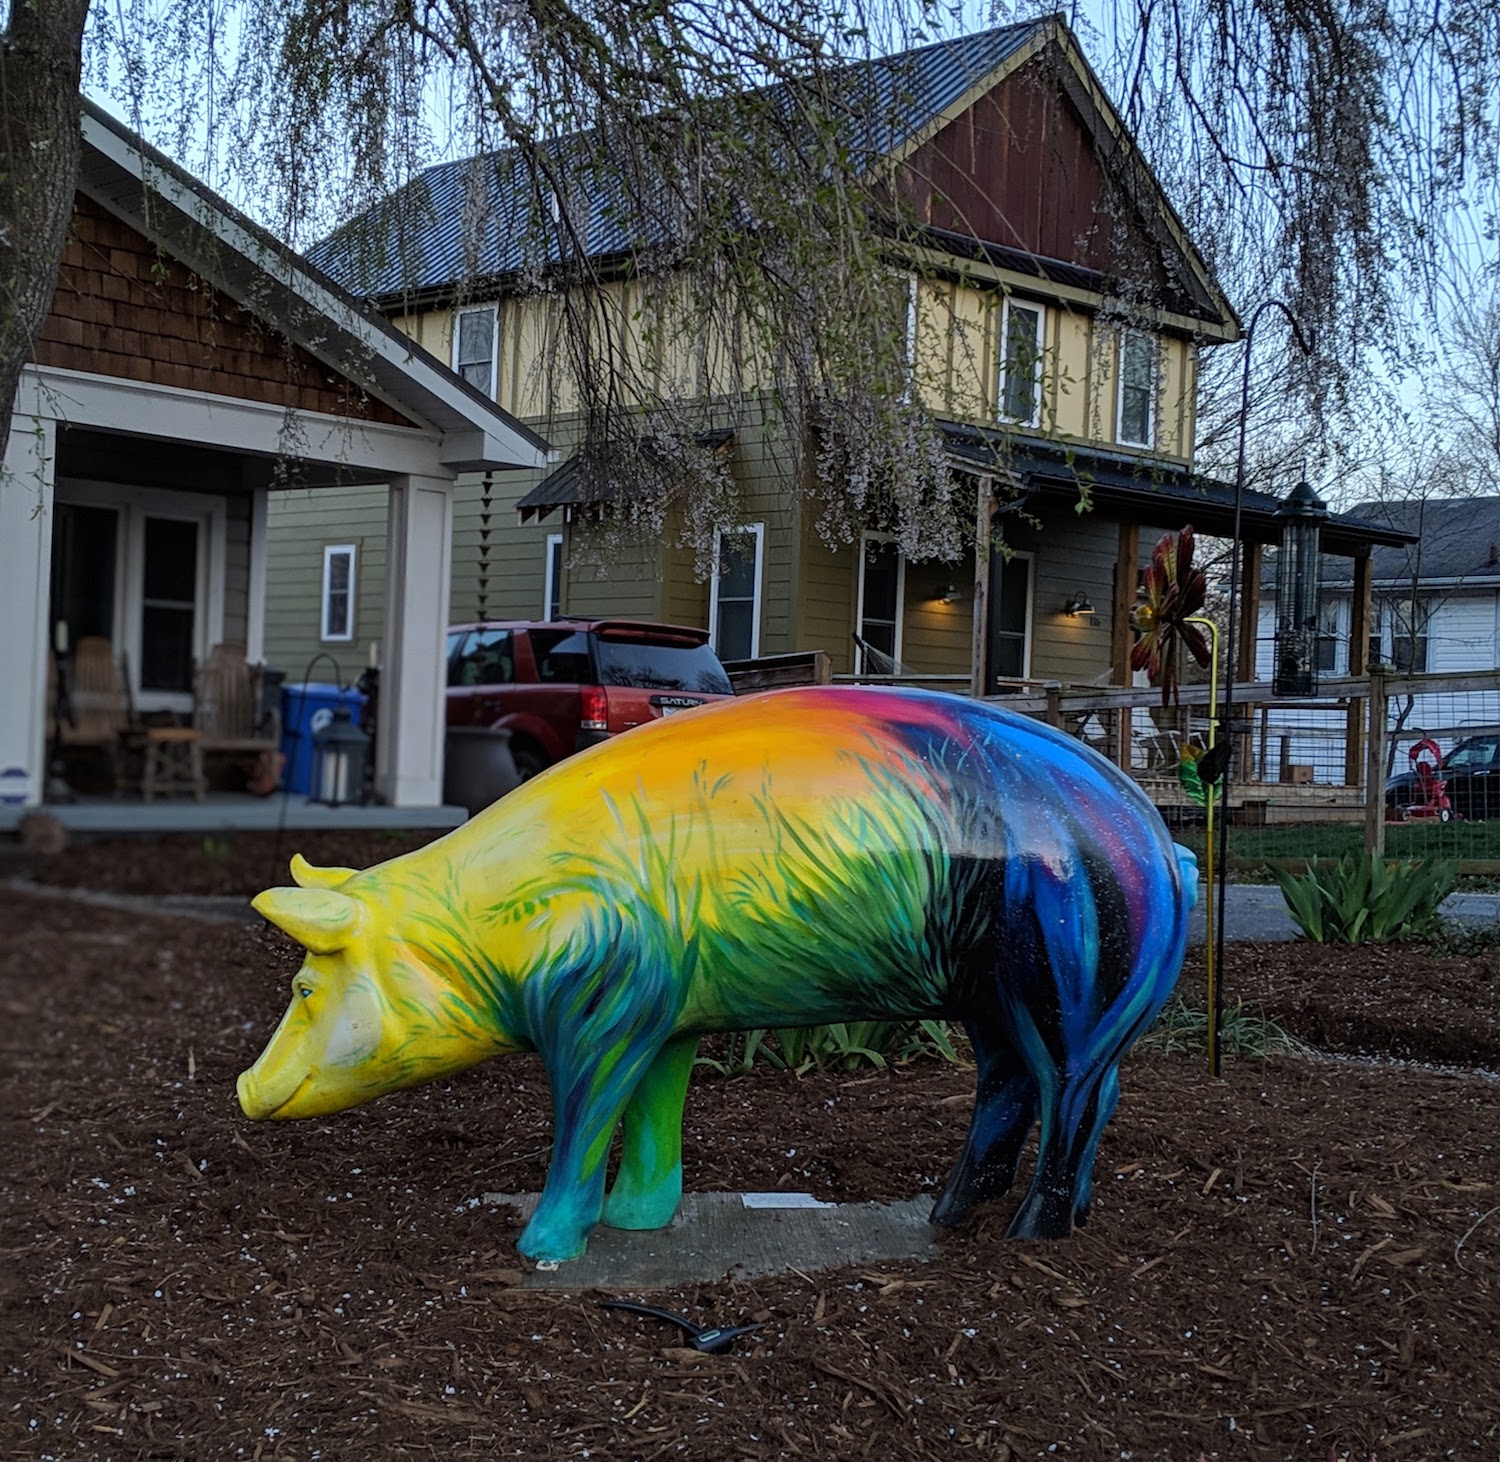 Top tips for moving to Asheville. This photo is of a rainbow pig scultpture taken in the west asheville neighborhood.